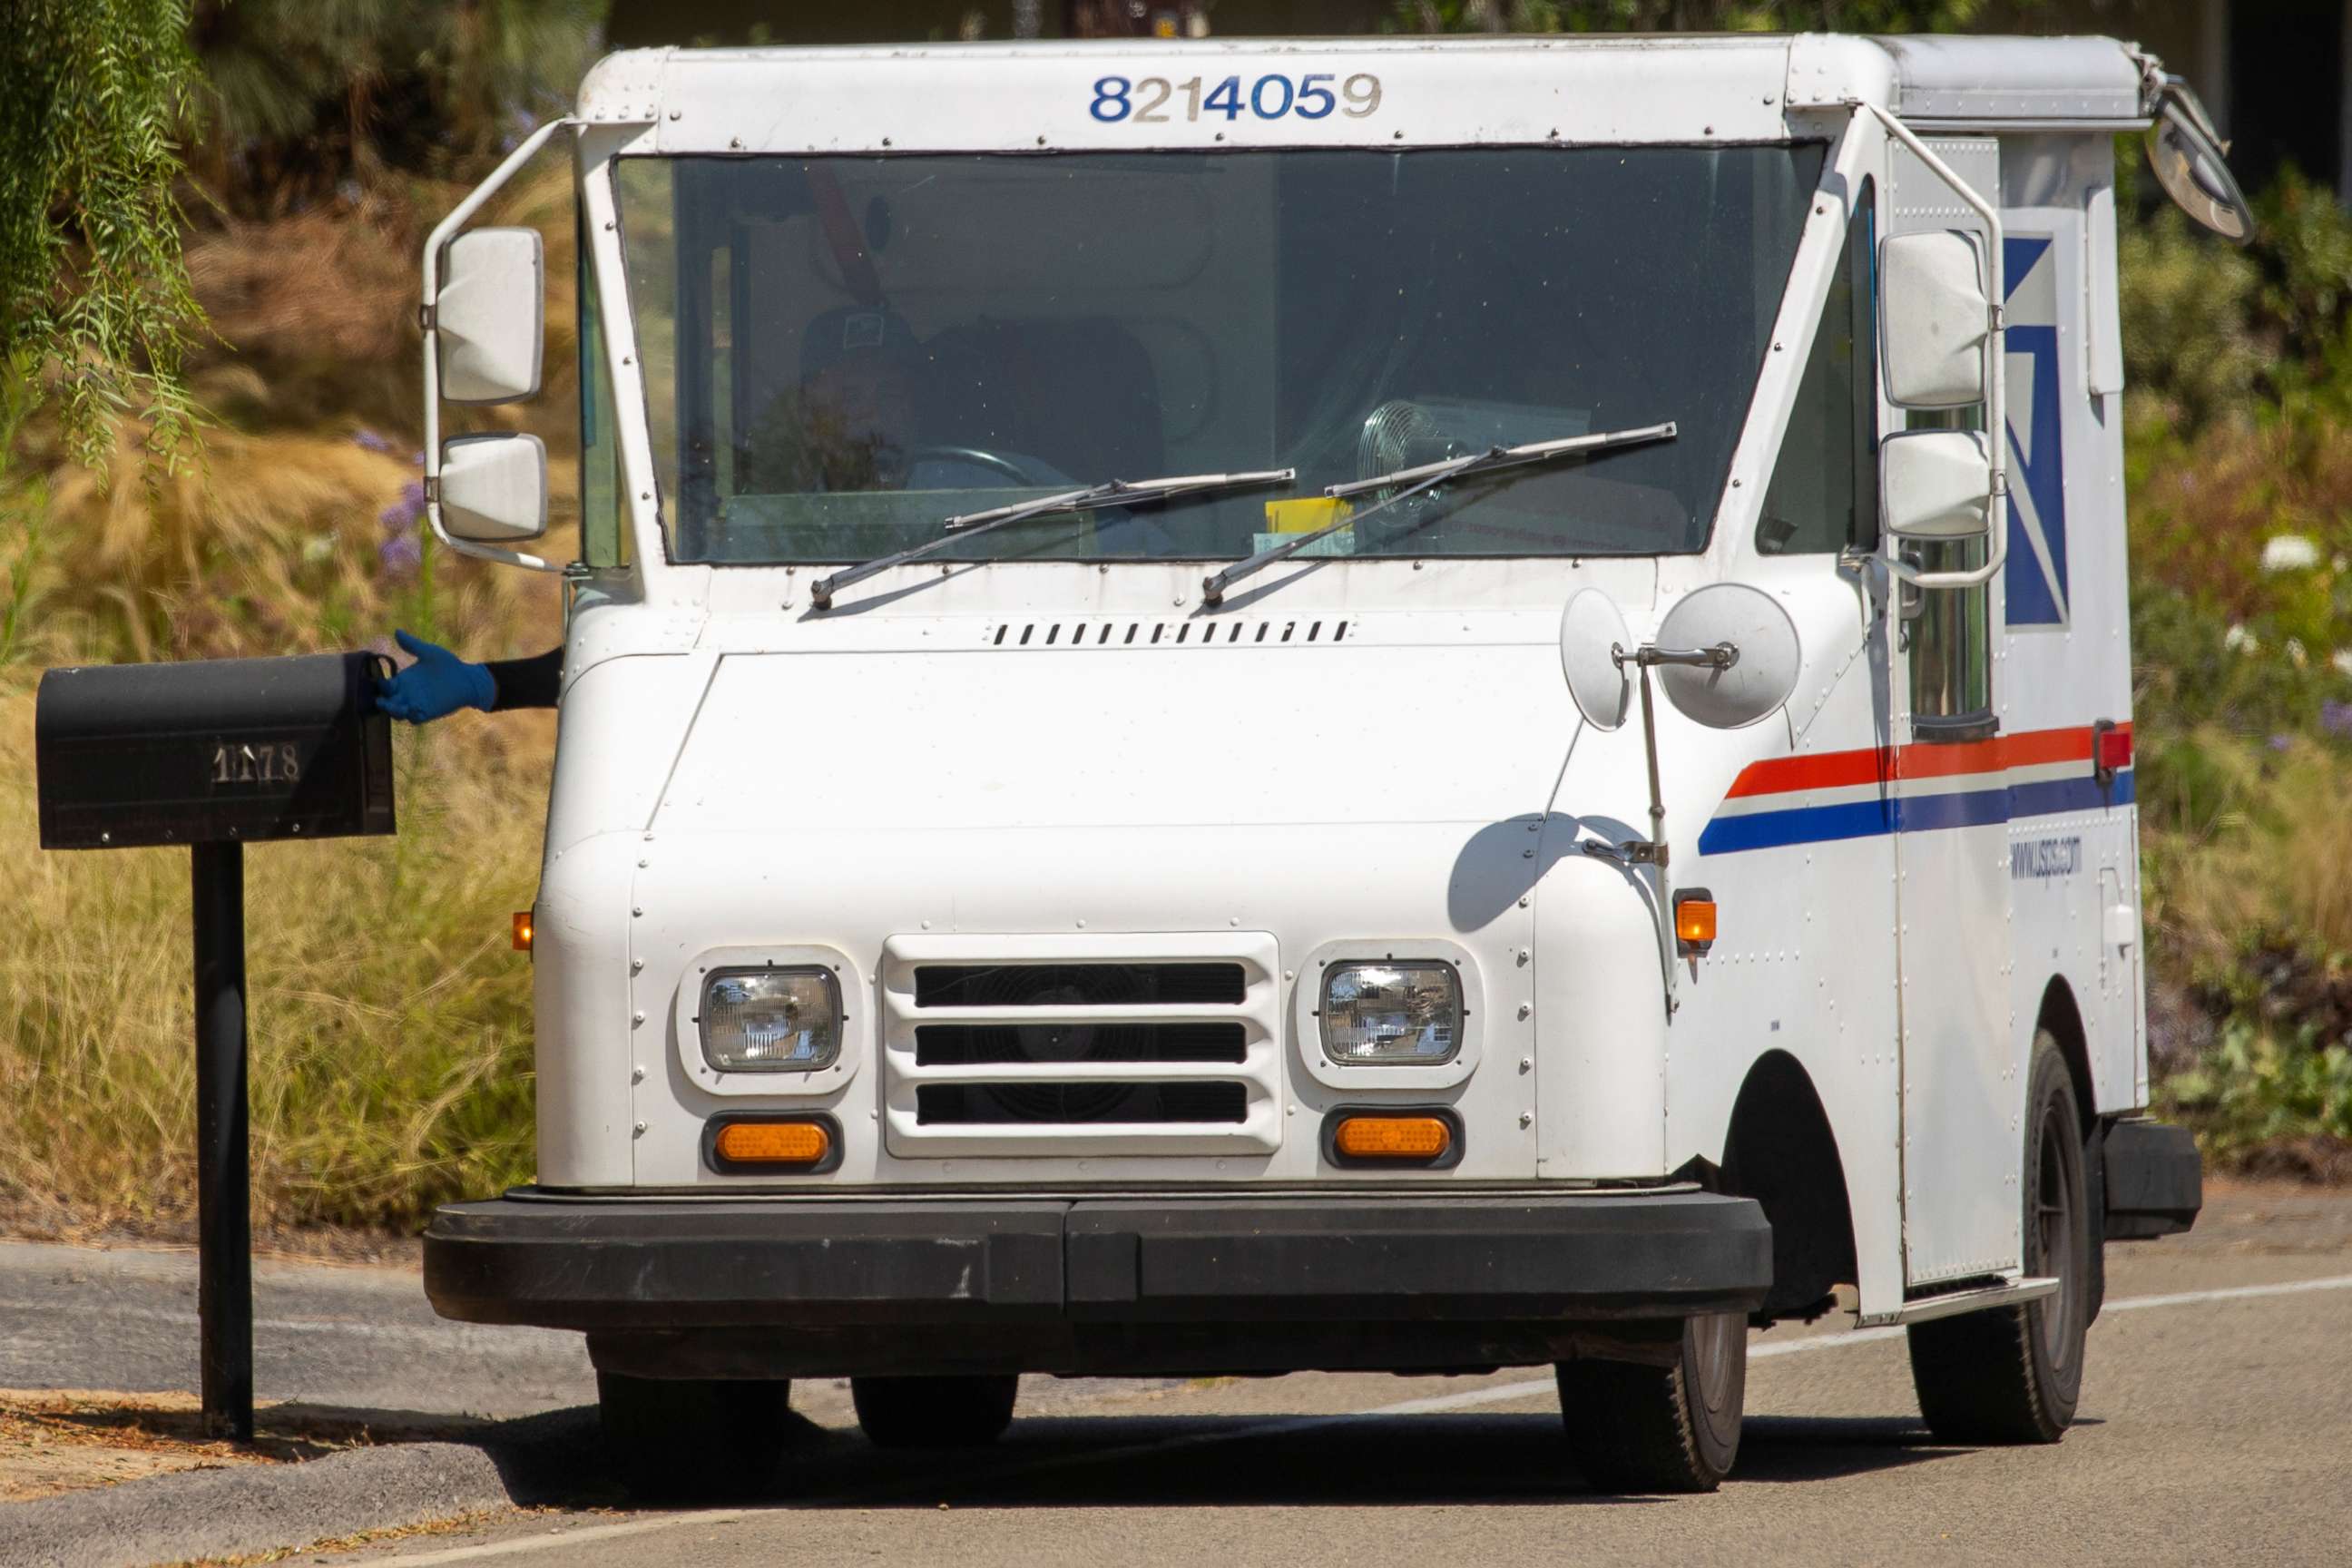 PHOTO: A U.S. postal service worker delivers mail during the outbreak of COVID-19 in Encinitas, Calif., July 30, 2020.